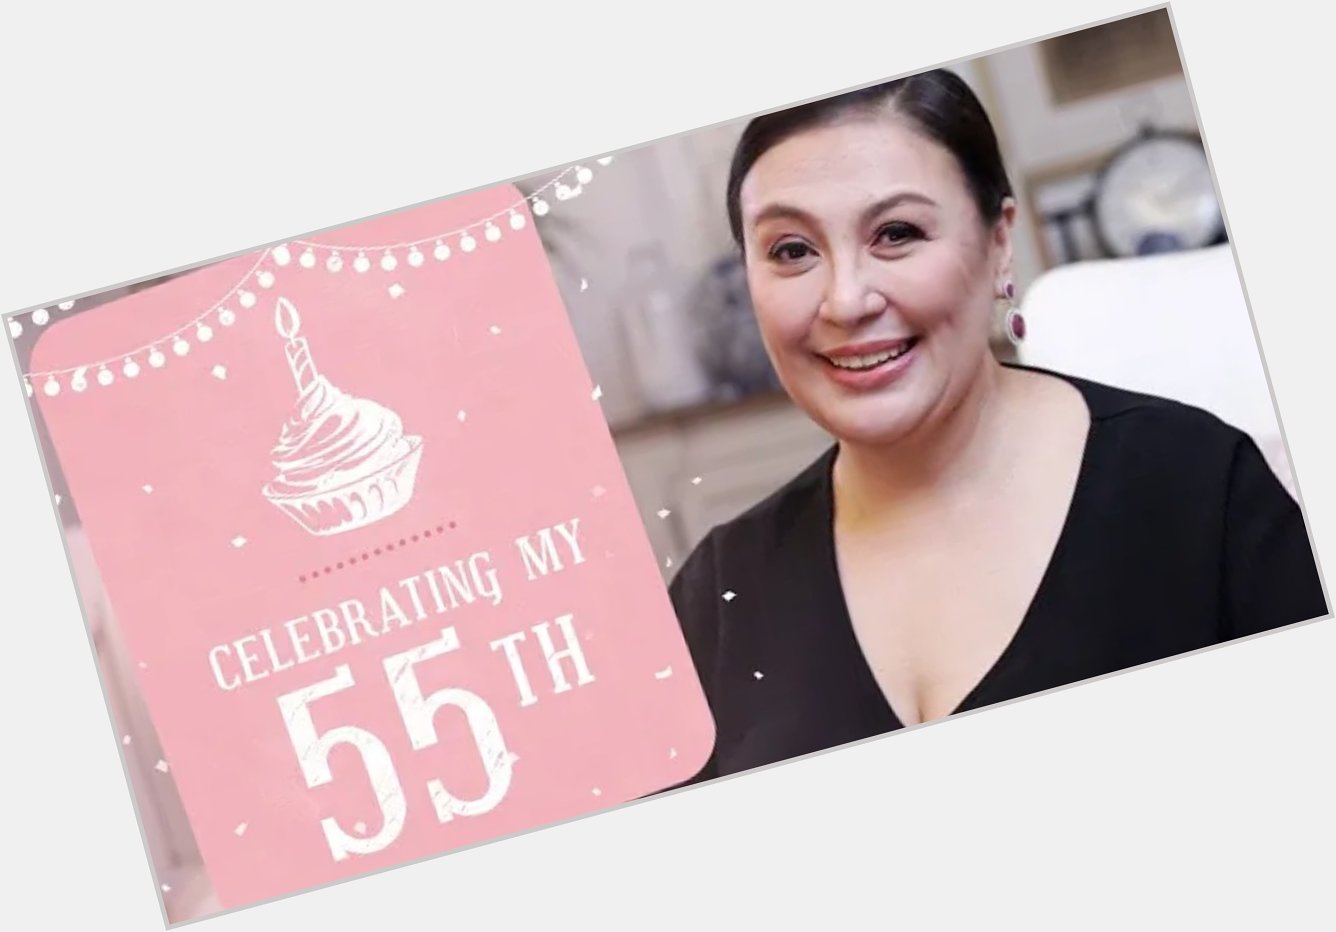 Watch now the new video 
name of yt channel: Sharon Cuneta Network

HAPPY BIRTHDAY MEGASTAR 